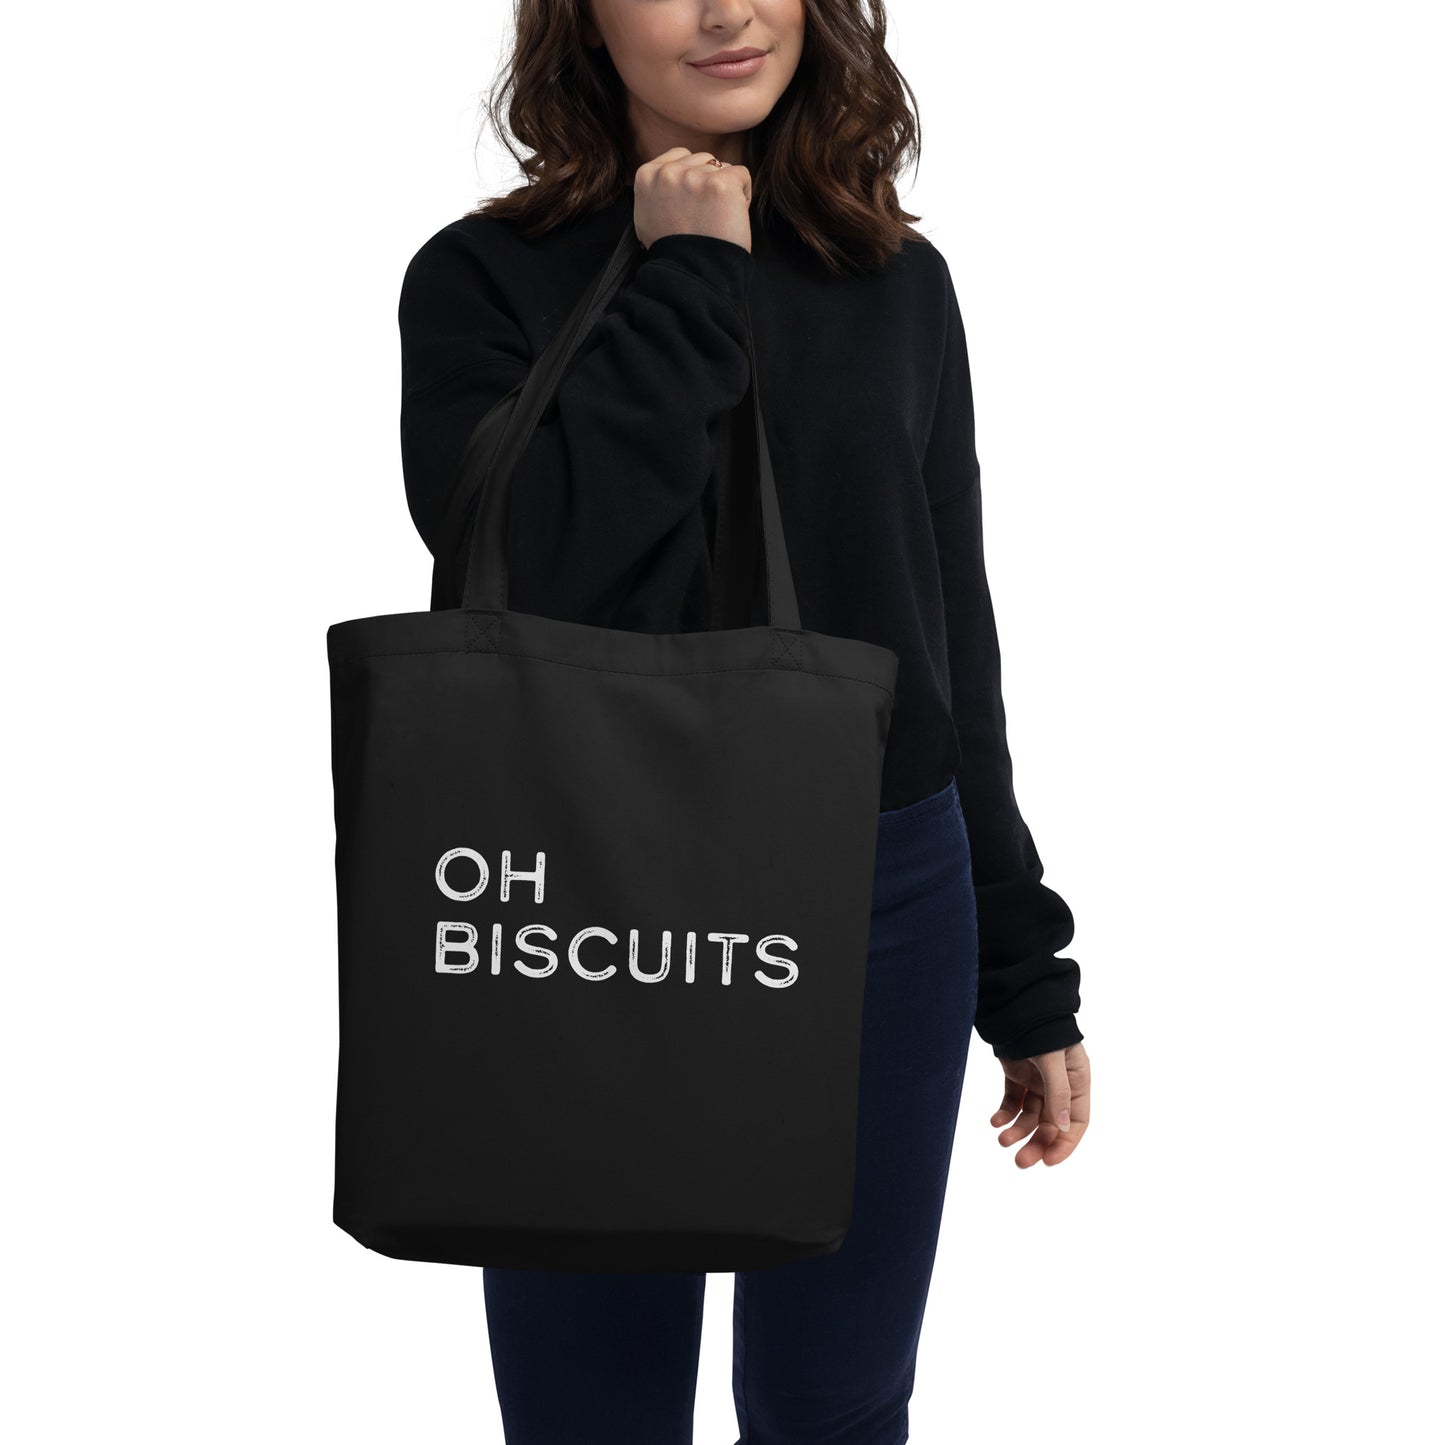 Oh Biscuits Tote Bag